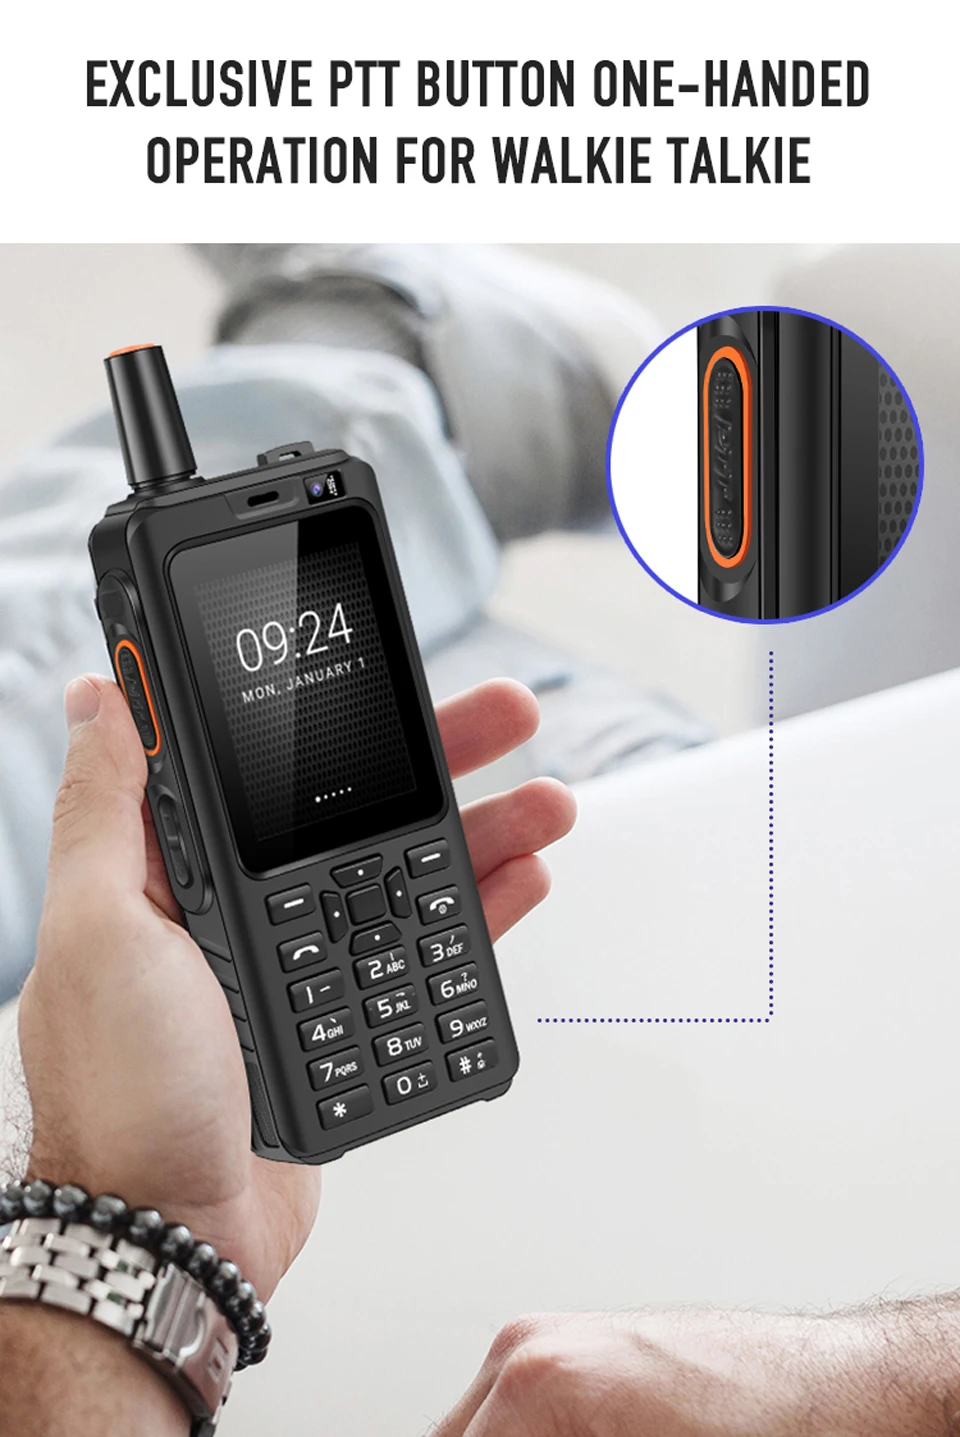 cheapest cell phone for gaming UNIWA F40 Alps F40 Walkie Talkie 4G LTE Mobile Phone IP65 Waterproof Rugged Keyboard Smartphone Quad Core Android 8.1 VS F50 F60 motorola moto cell phone